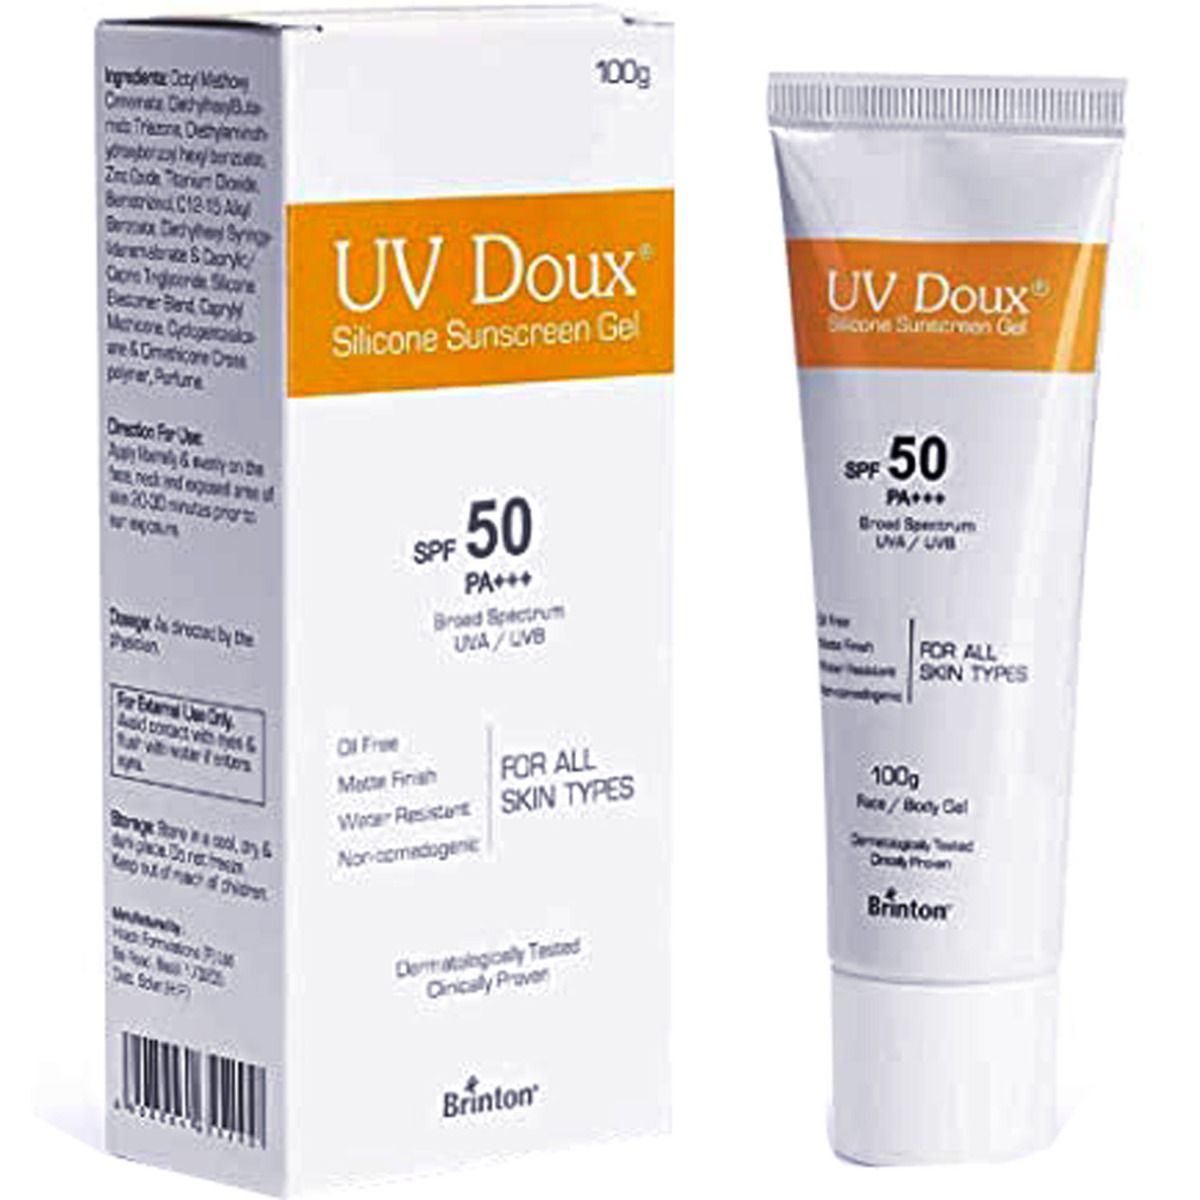 Buy Uv Doux Spf-50 Pa+++ Silicon Sunscreen Gel 100gm Online